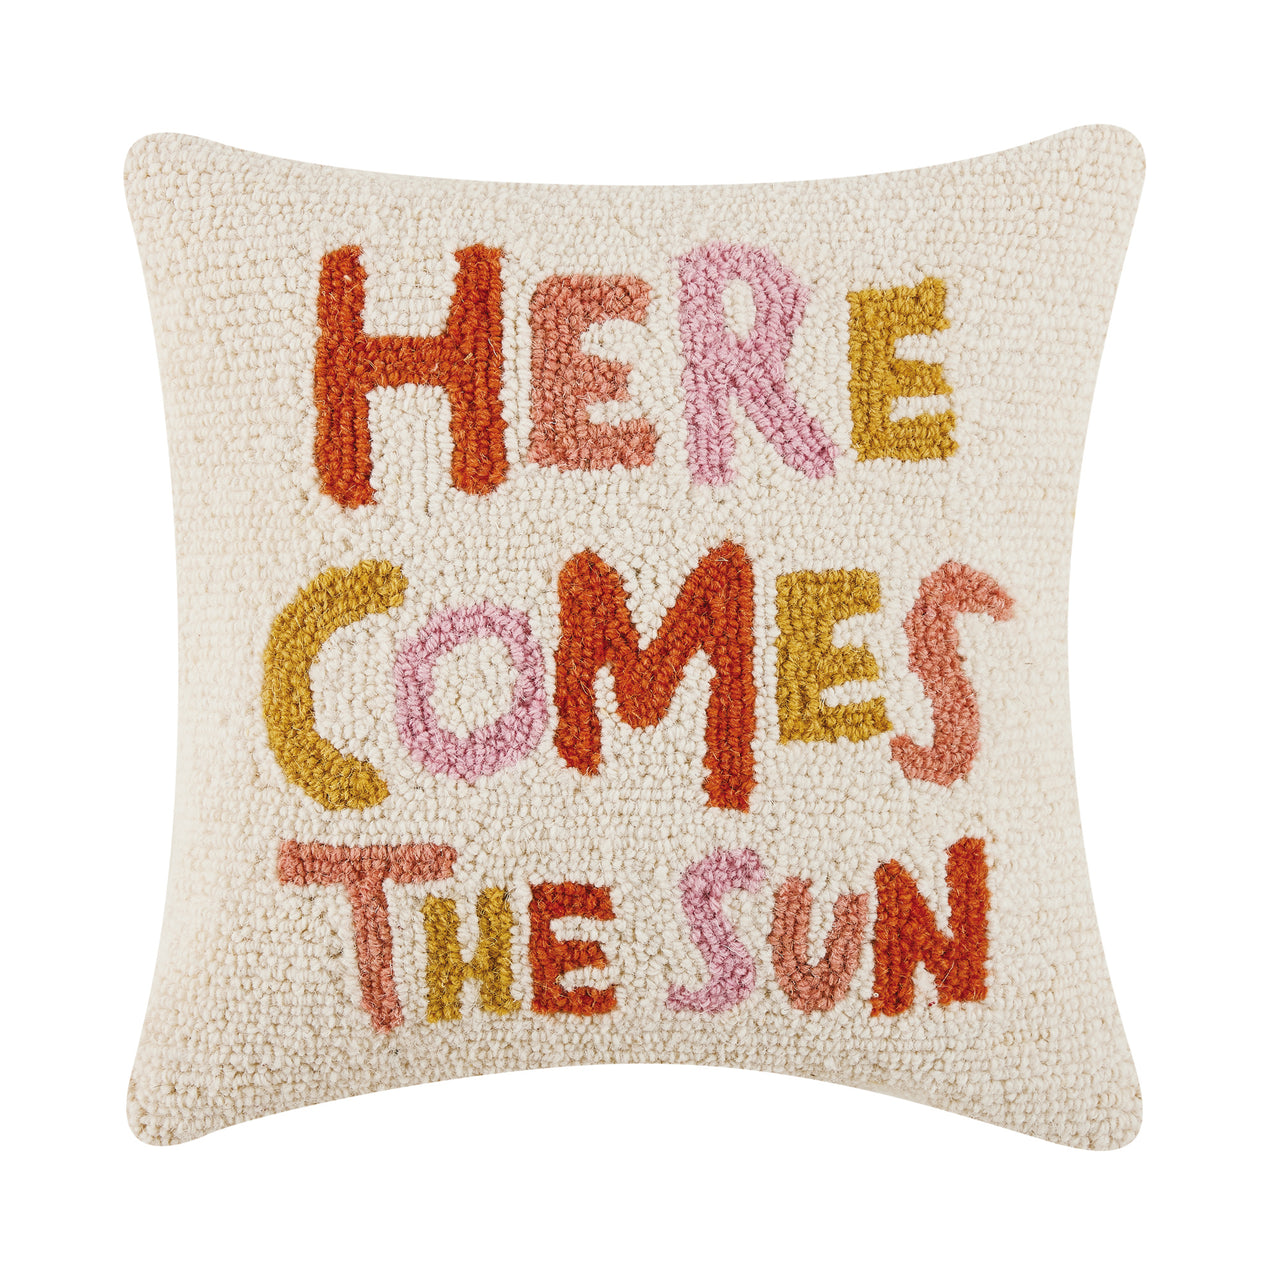 Here Comes The Sun Hook Pillow